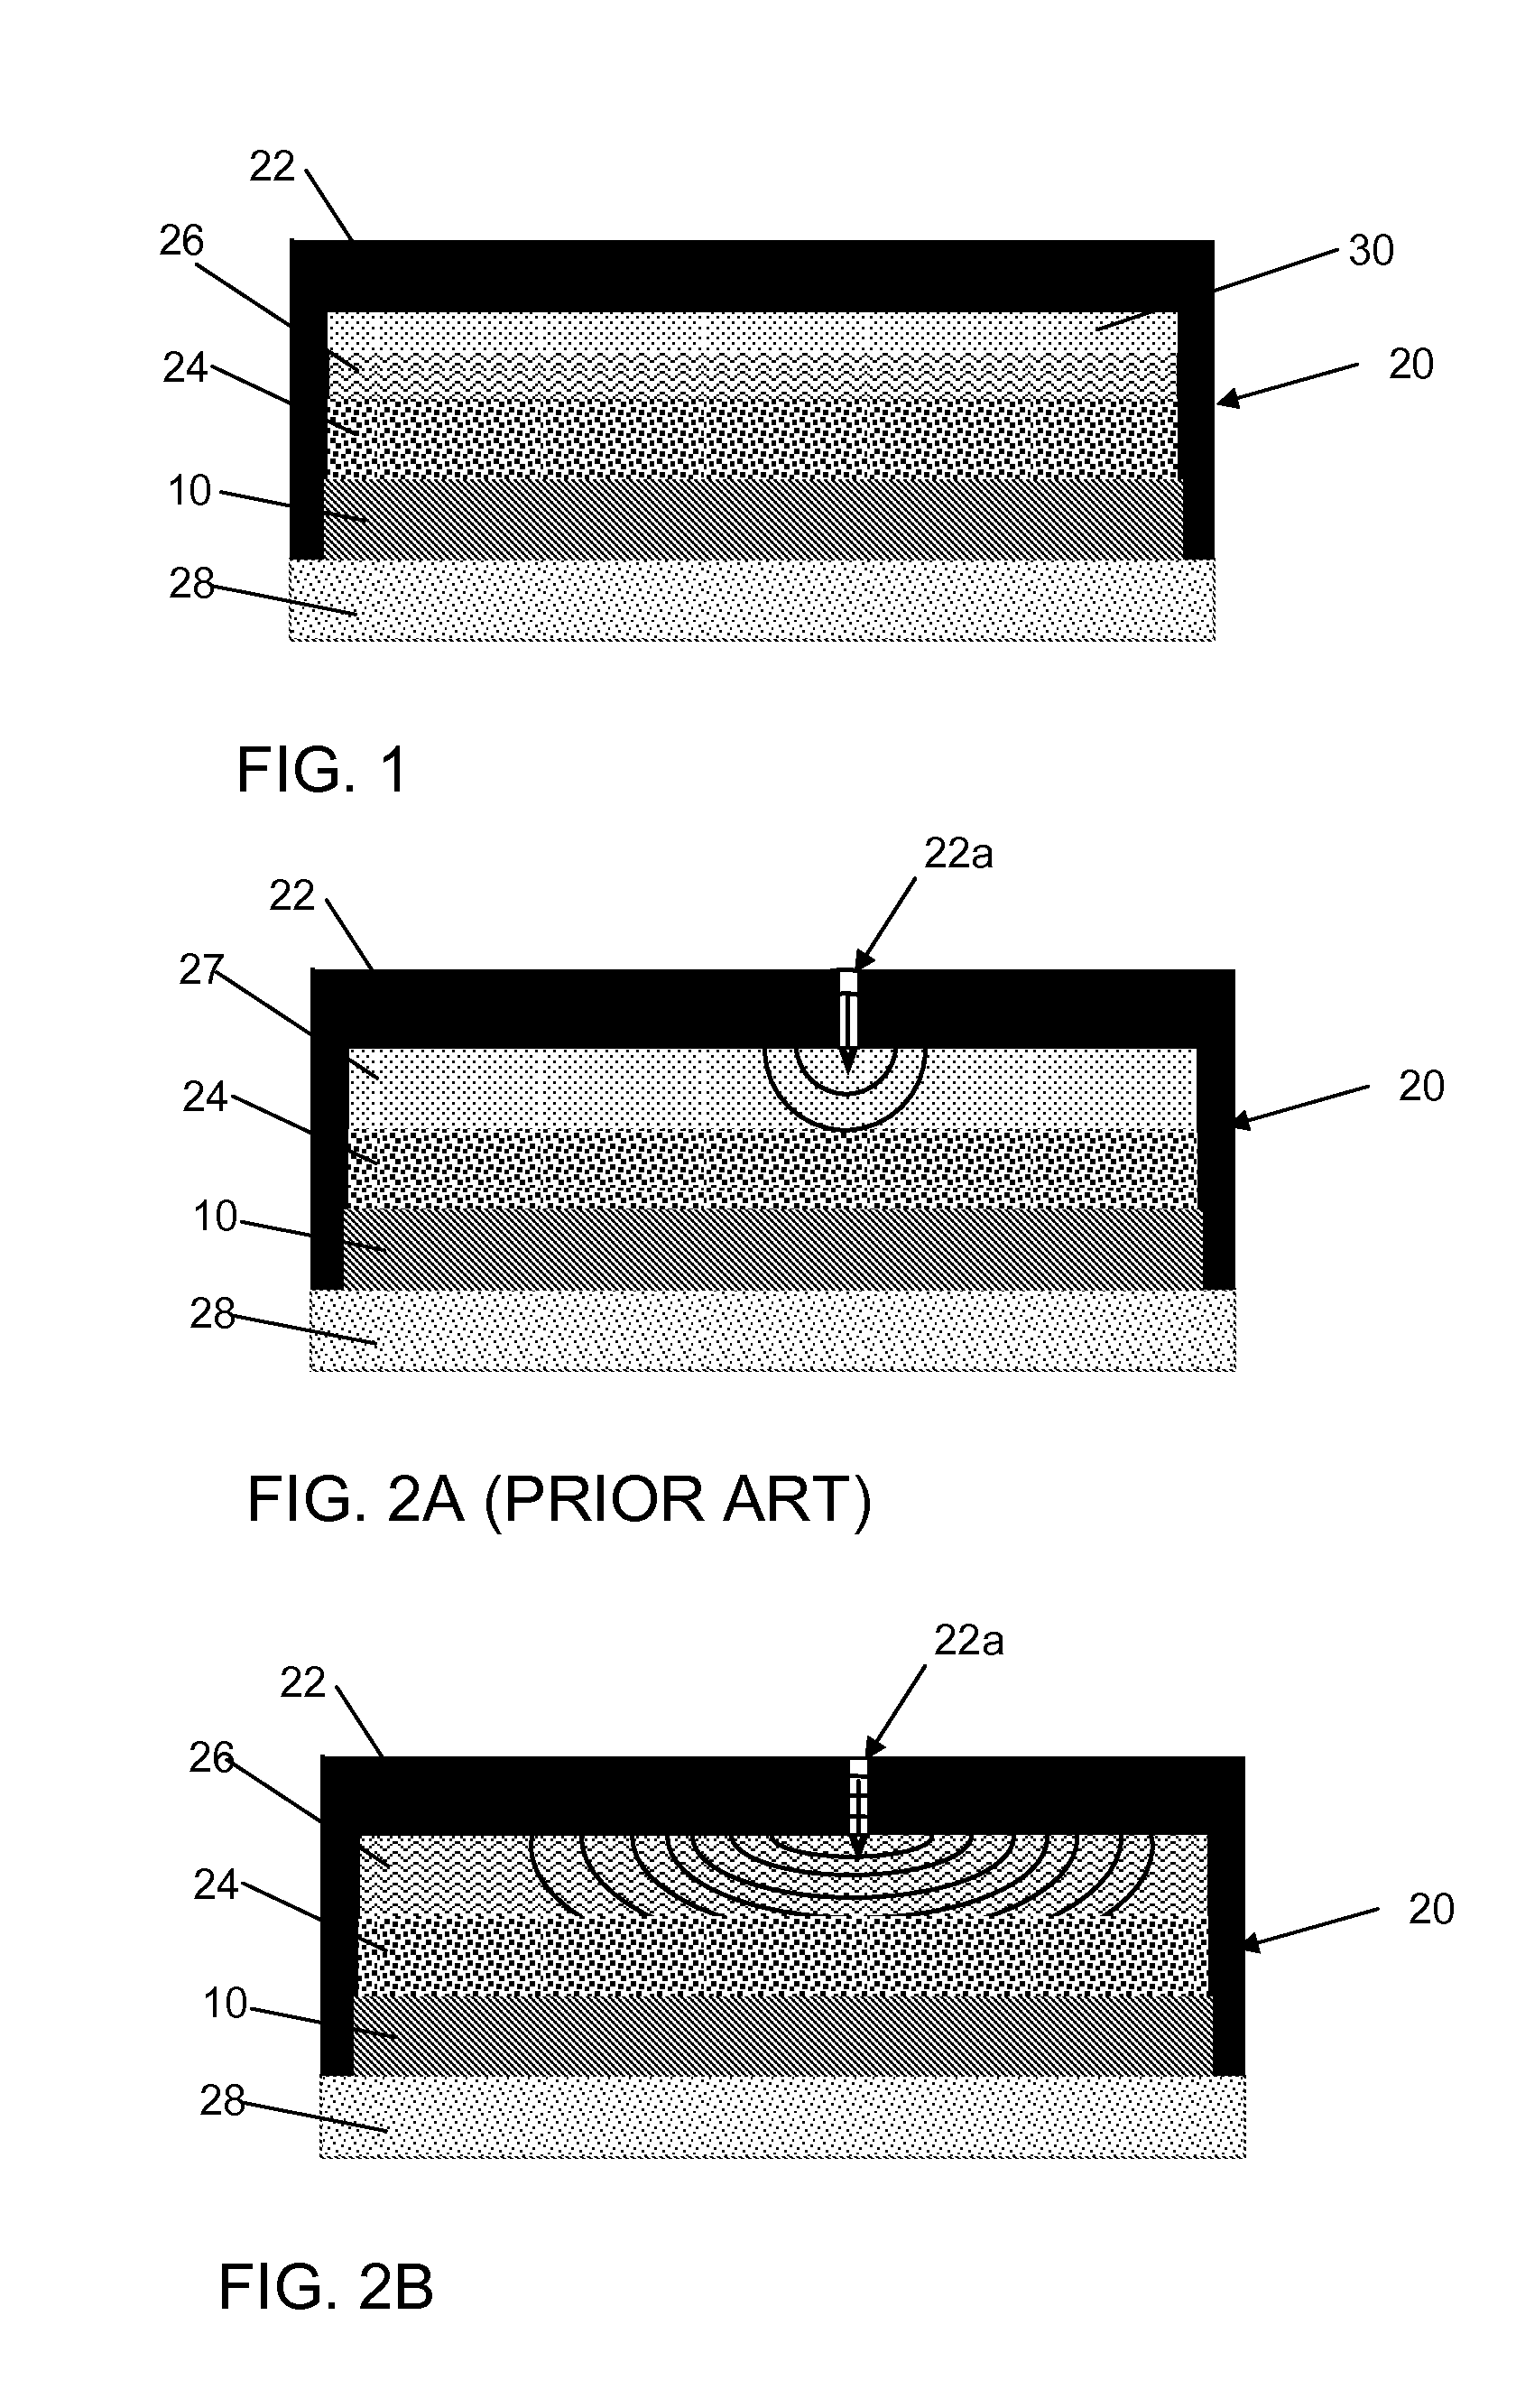 Opto-Electric Device and Method of Manufacturing an Opto-Electric Device